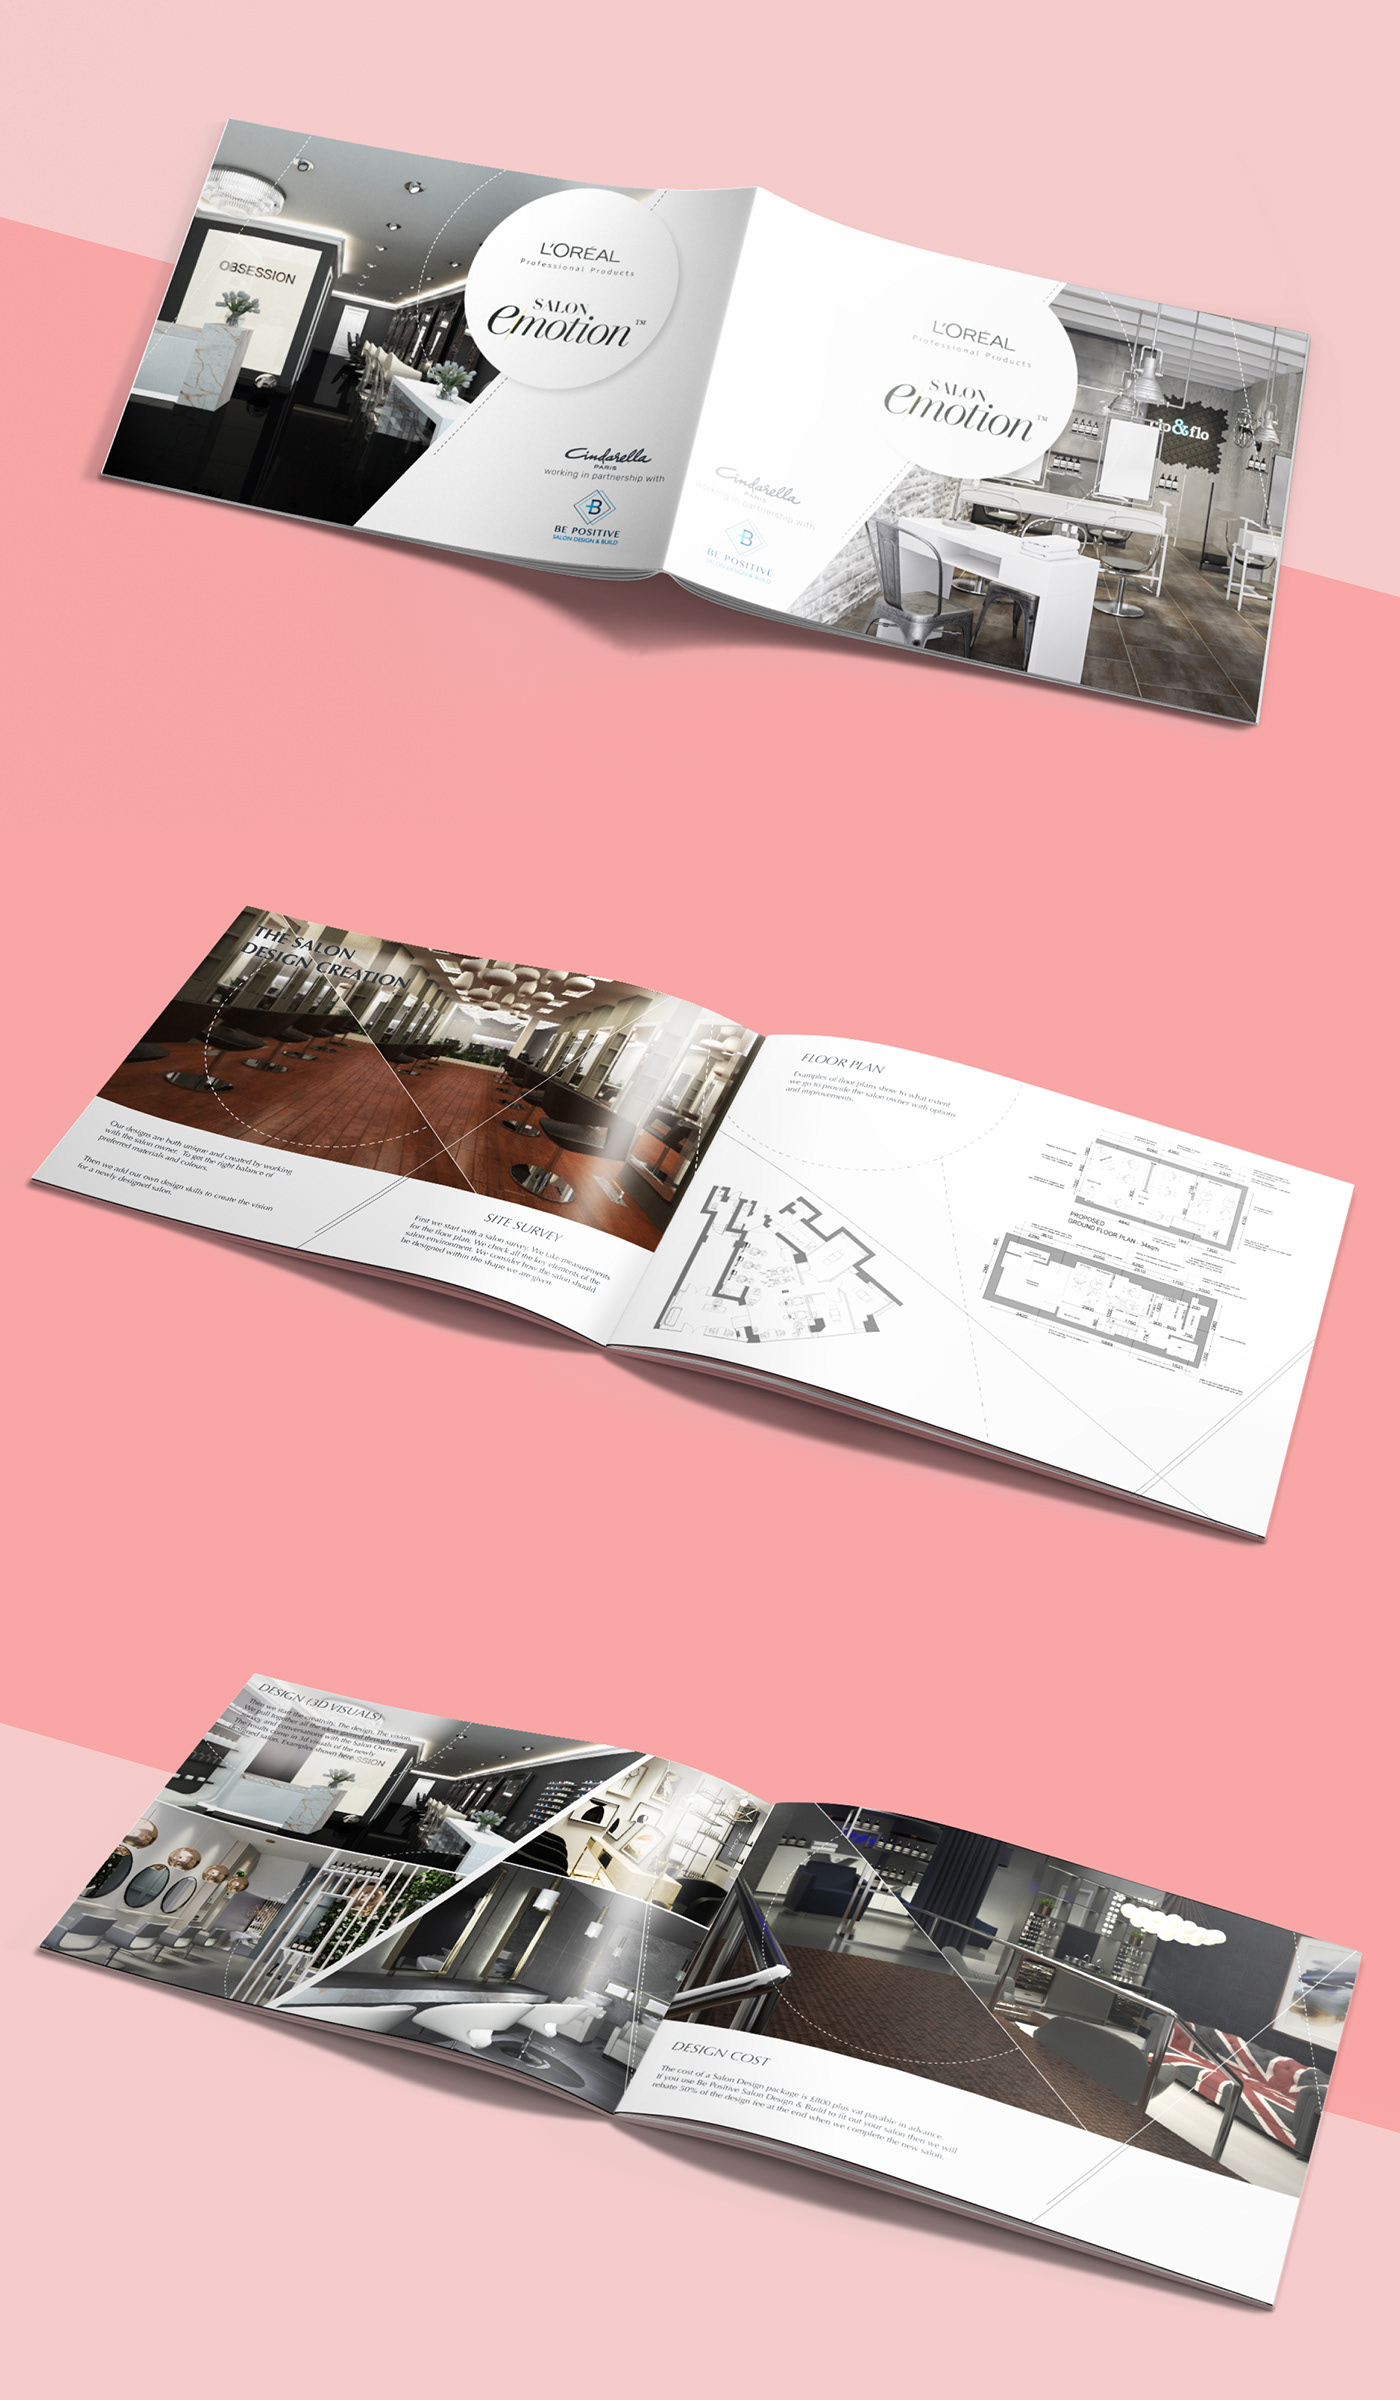 #Brochure #graphicDesign #typography #colors #graphicelements #graphicdesign #Branding